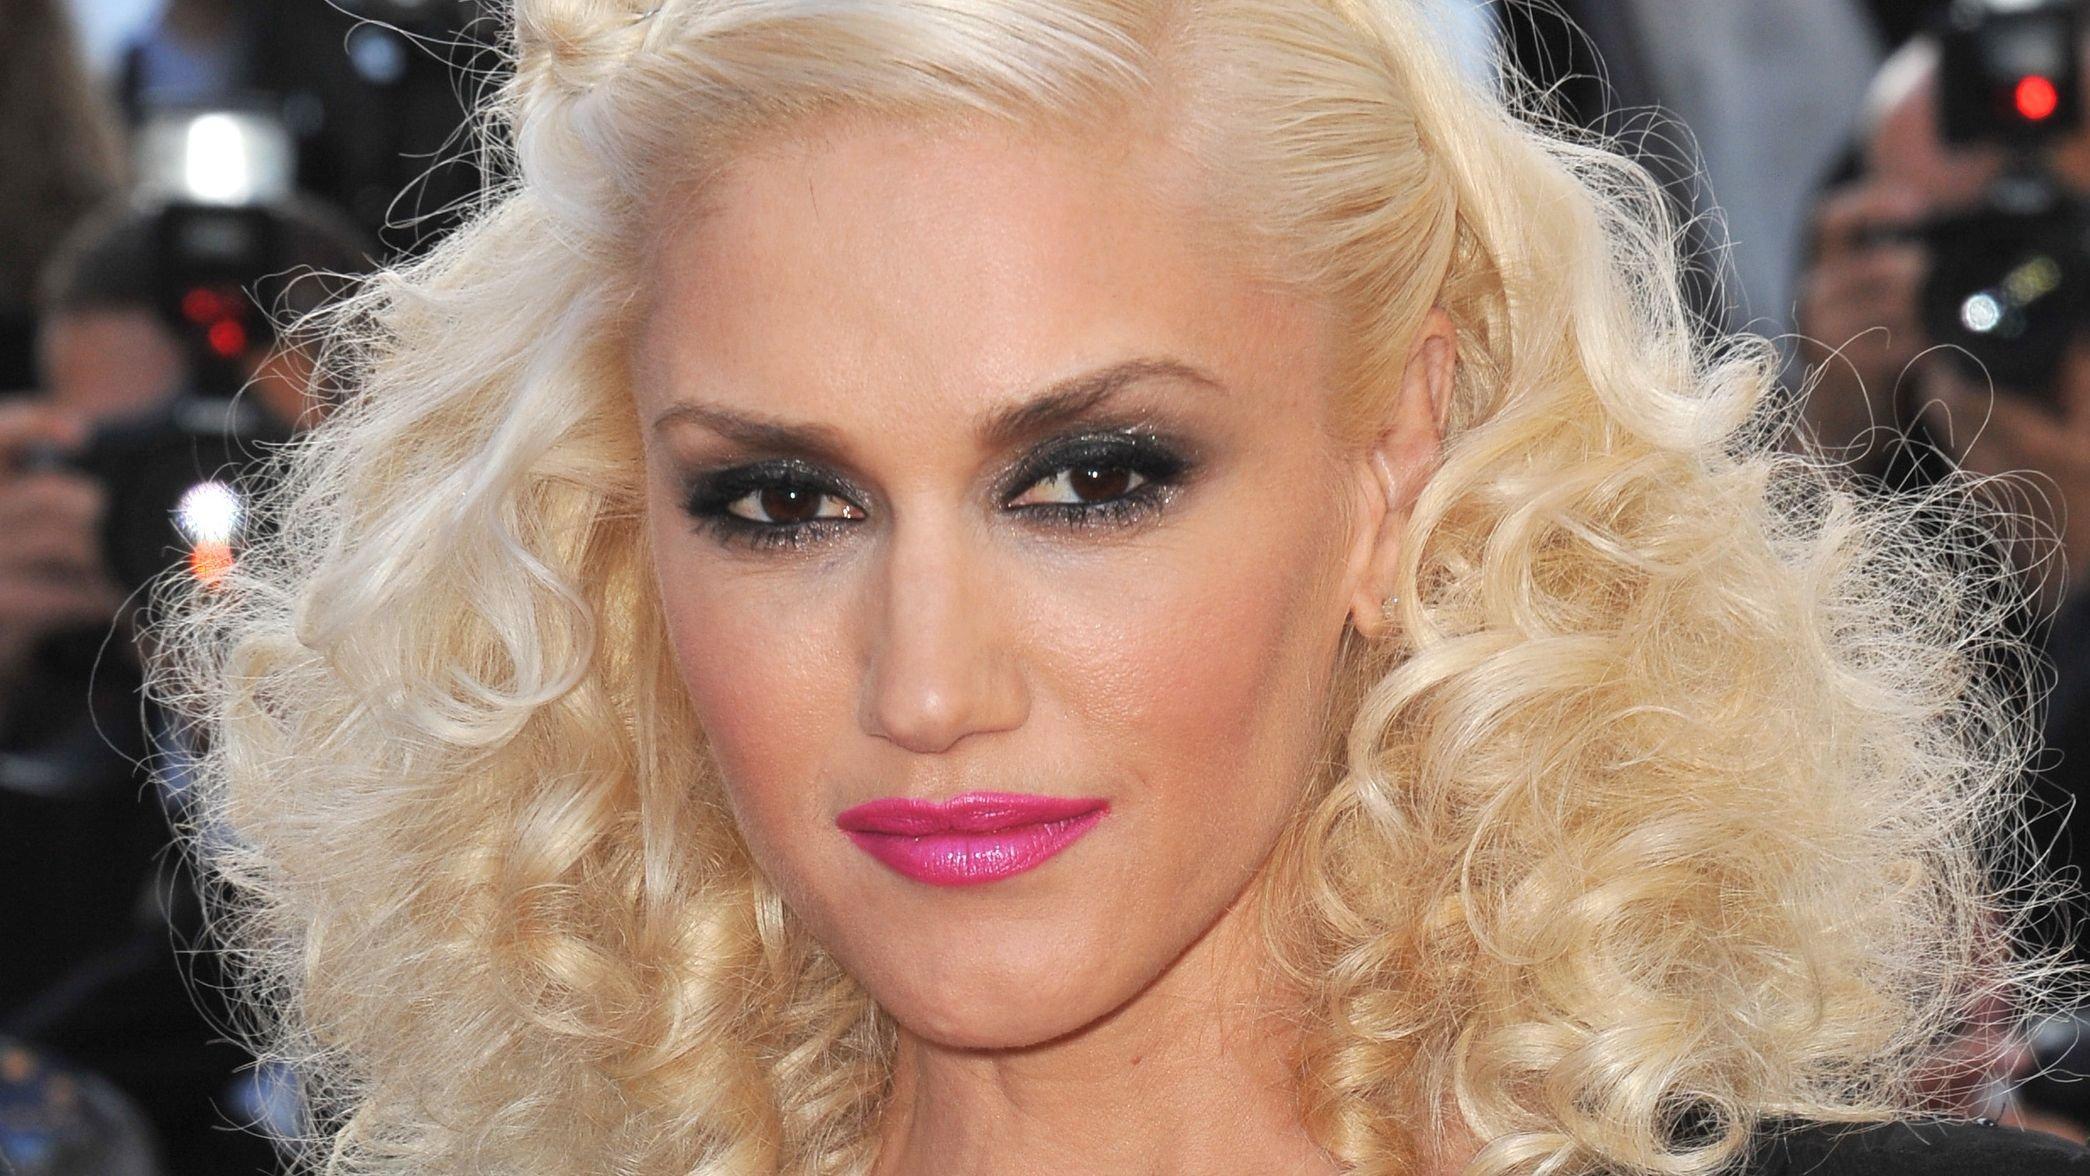 Gwen Stefani with curly hair and pink lipstick